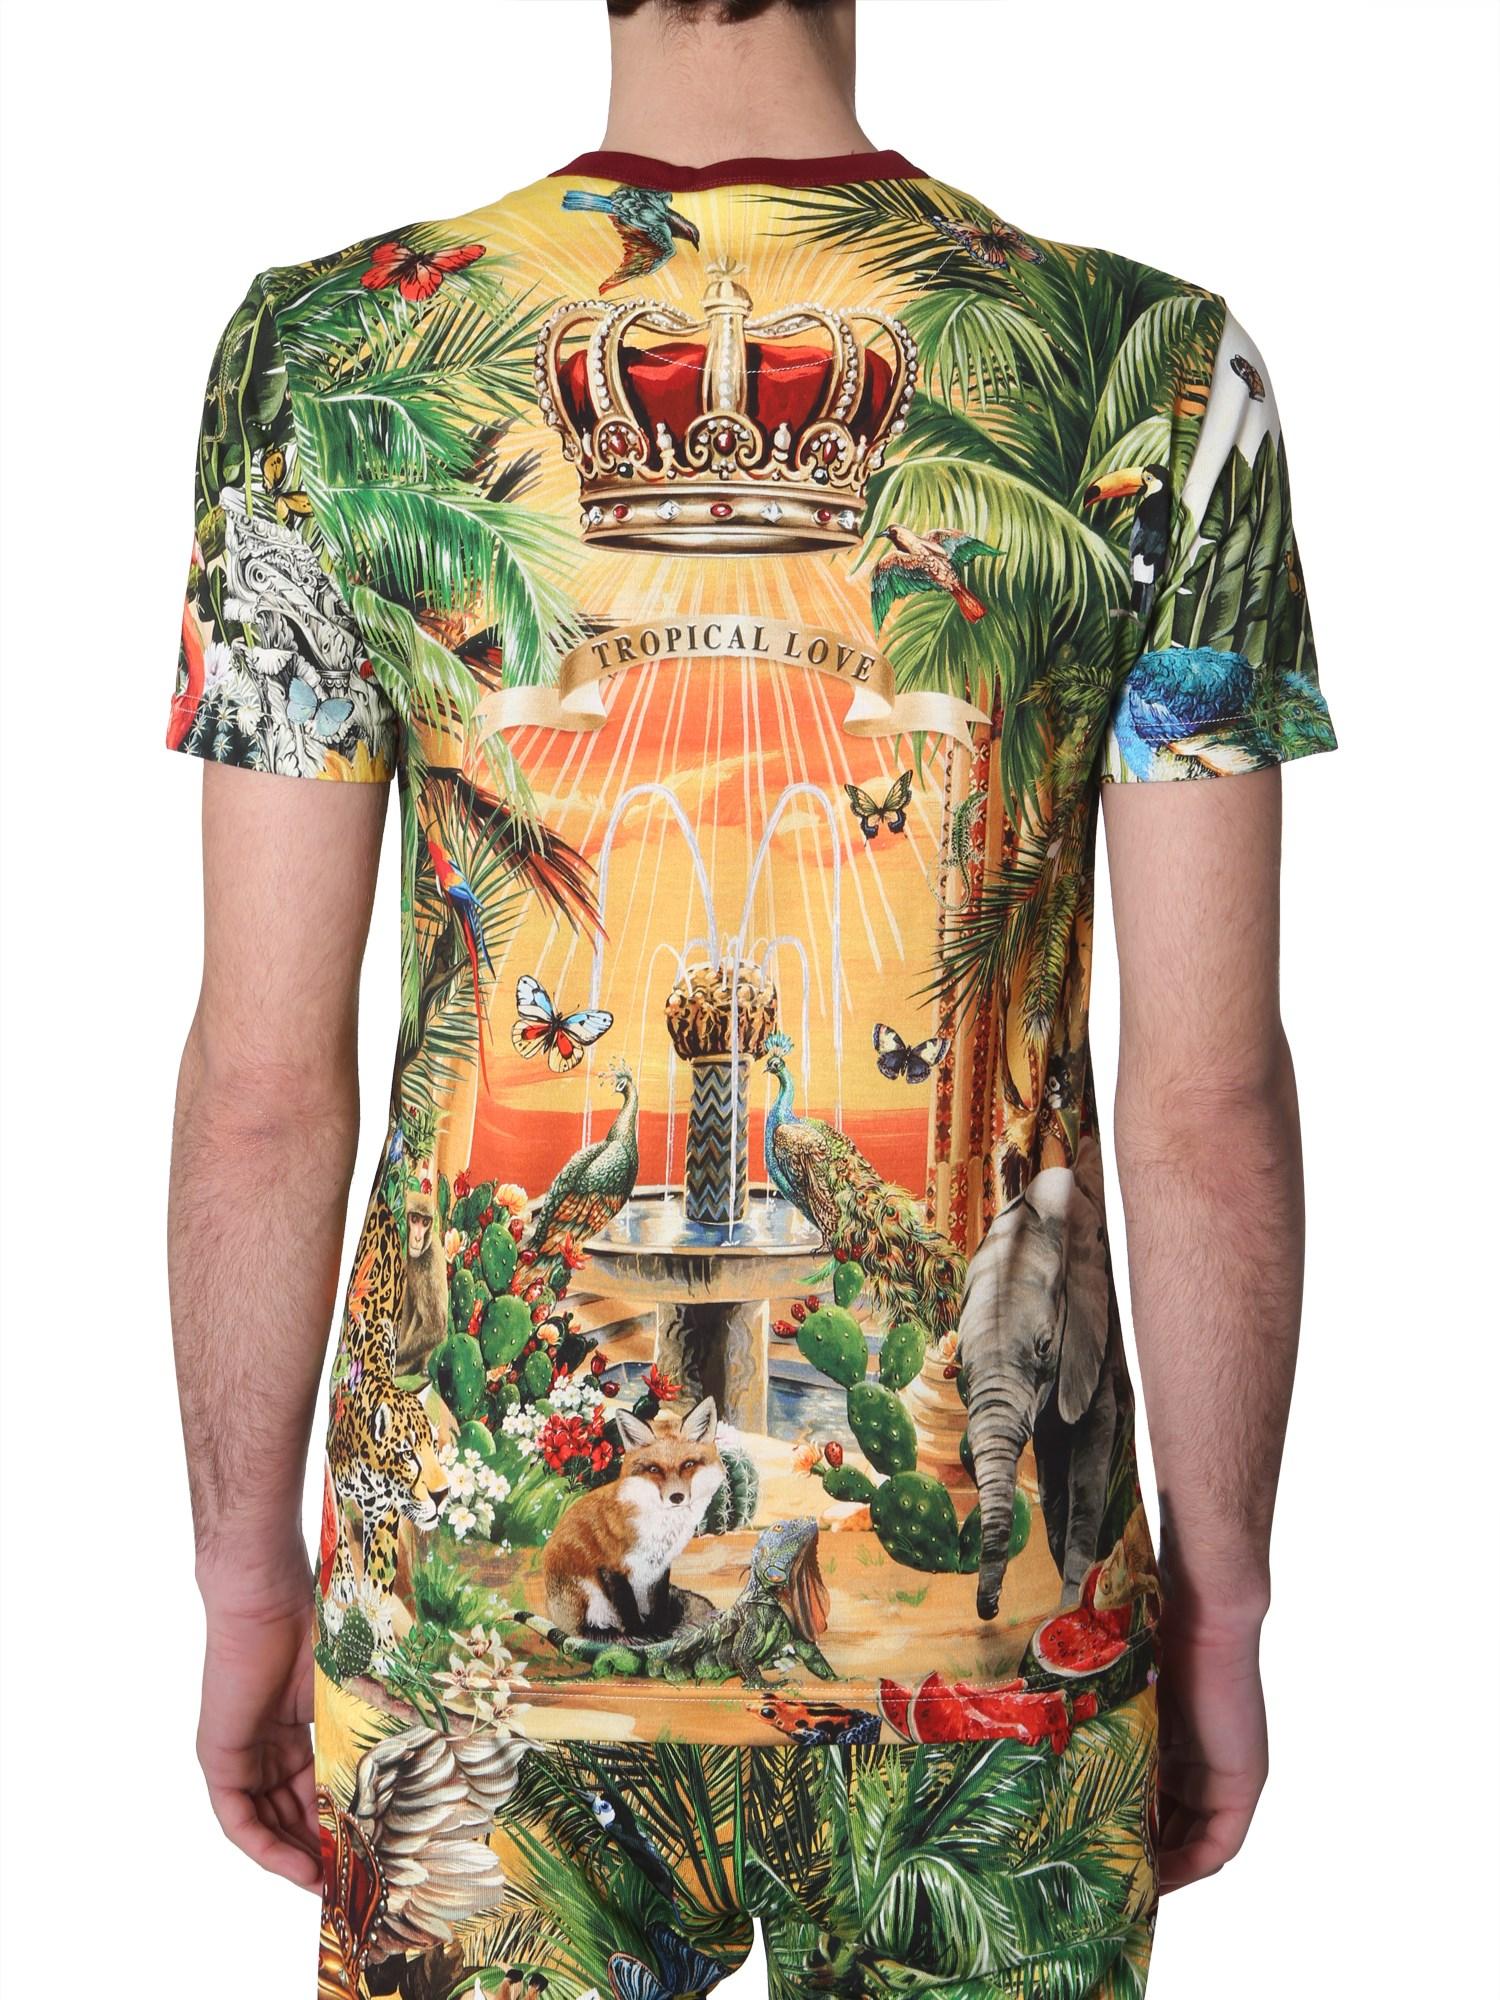 Dolce & Gabbana Cotton T-shirt With Tropical King Print for Men - Lyst